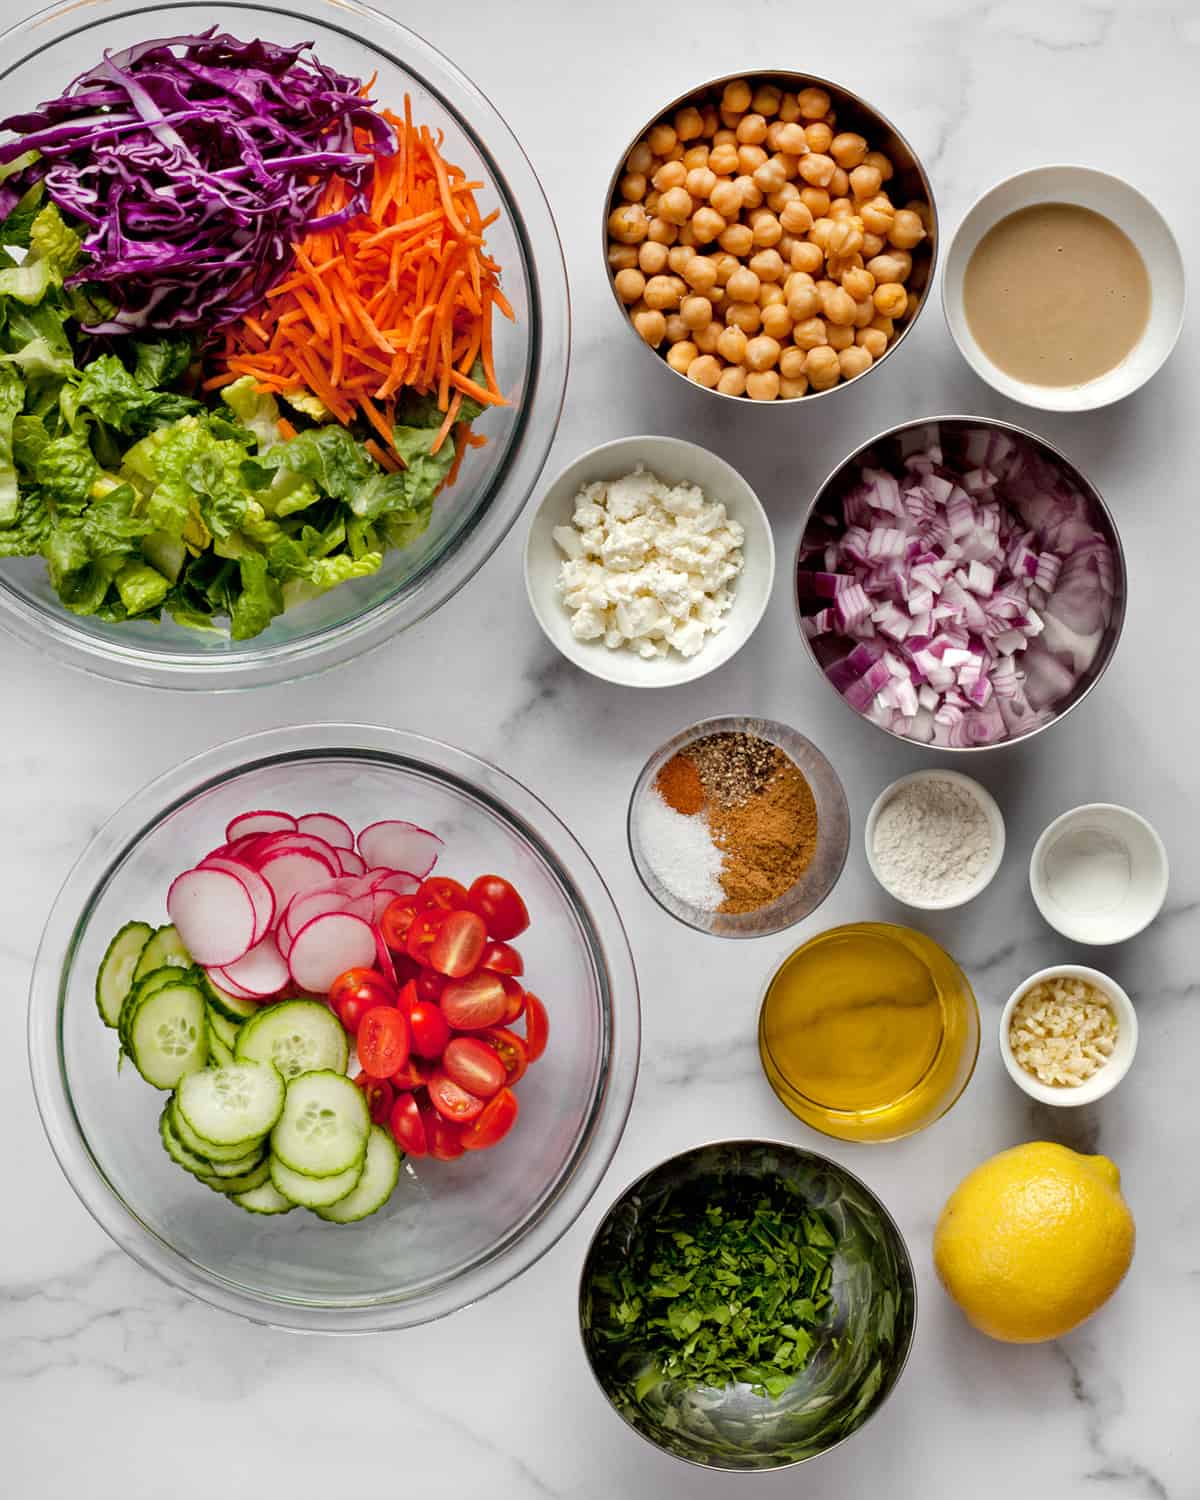 Ingredients including chickpeas, romaine, carrots, cabbage, cucumbers, tomatoes radishes and spices.